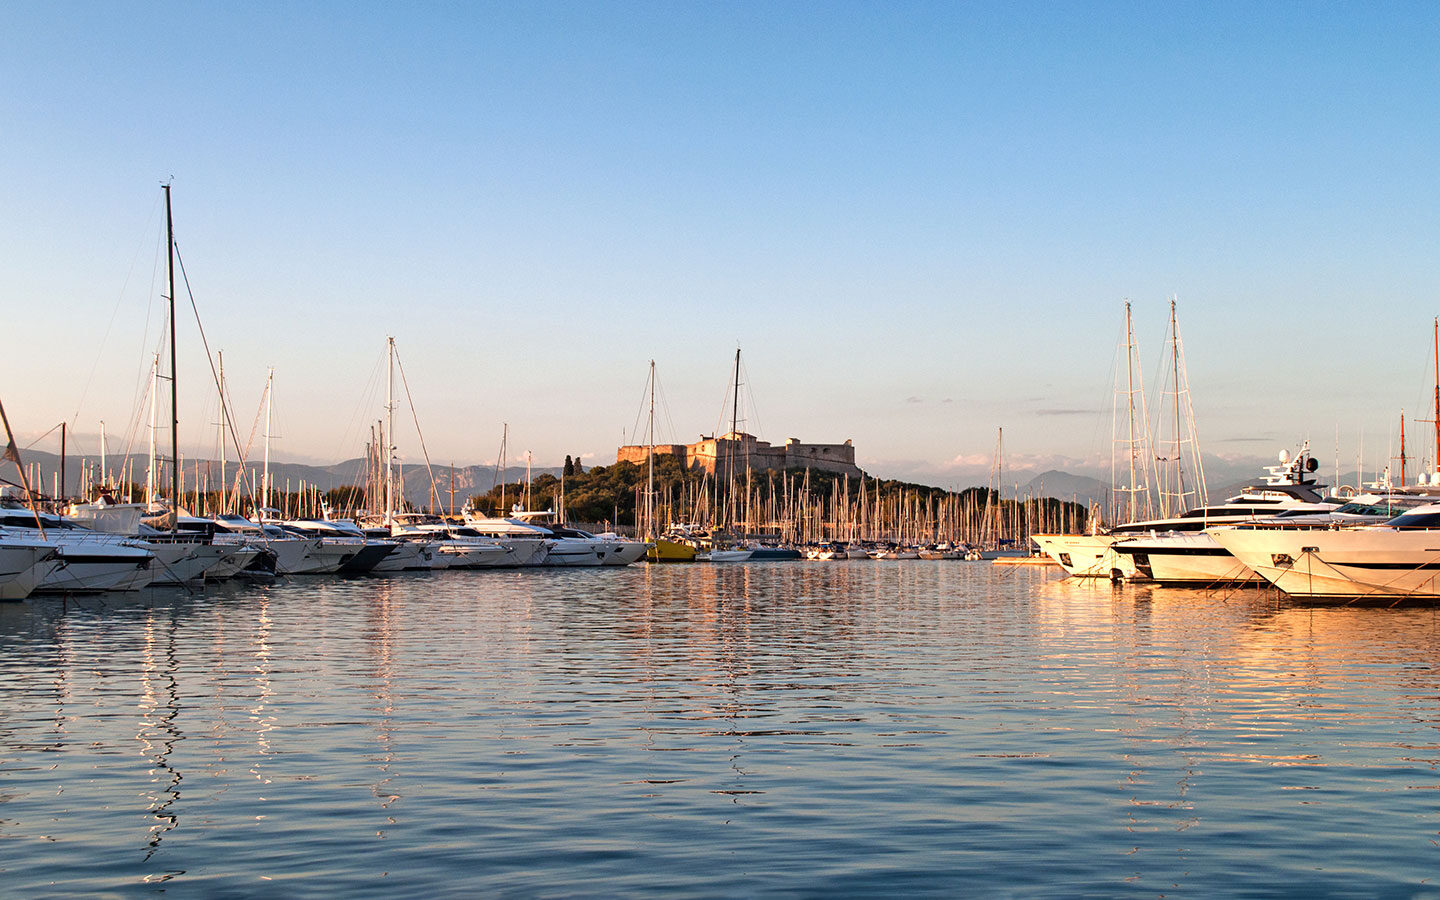 Boats in the harbour in Antibes at sunset